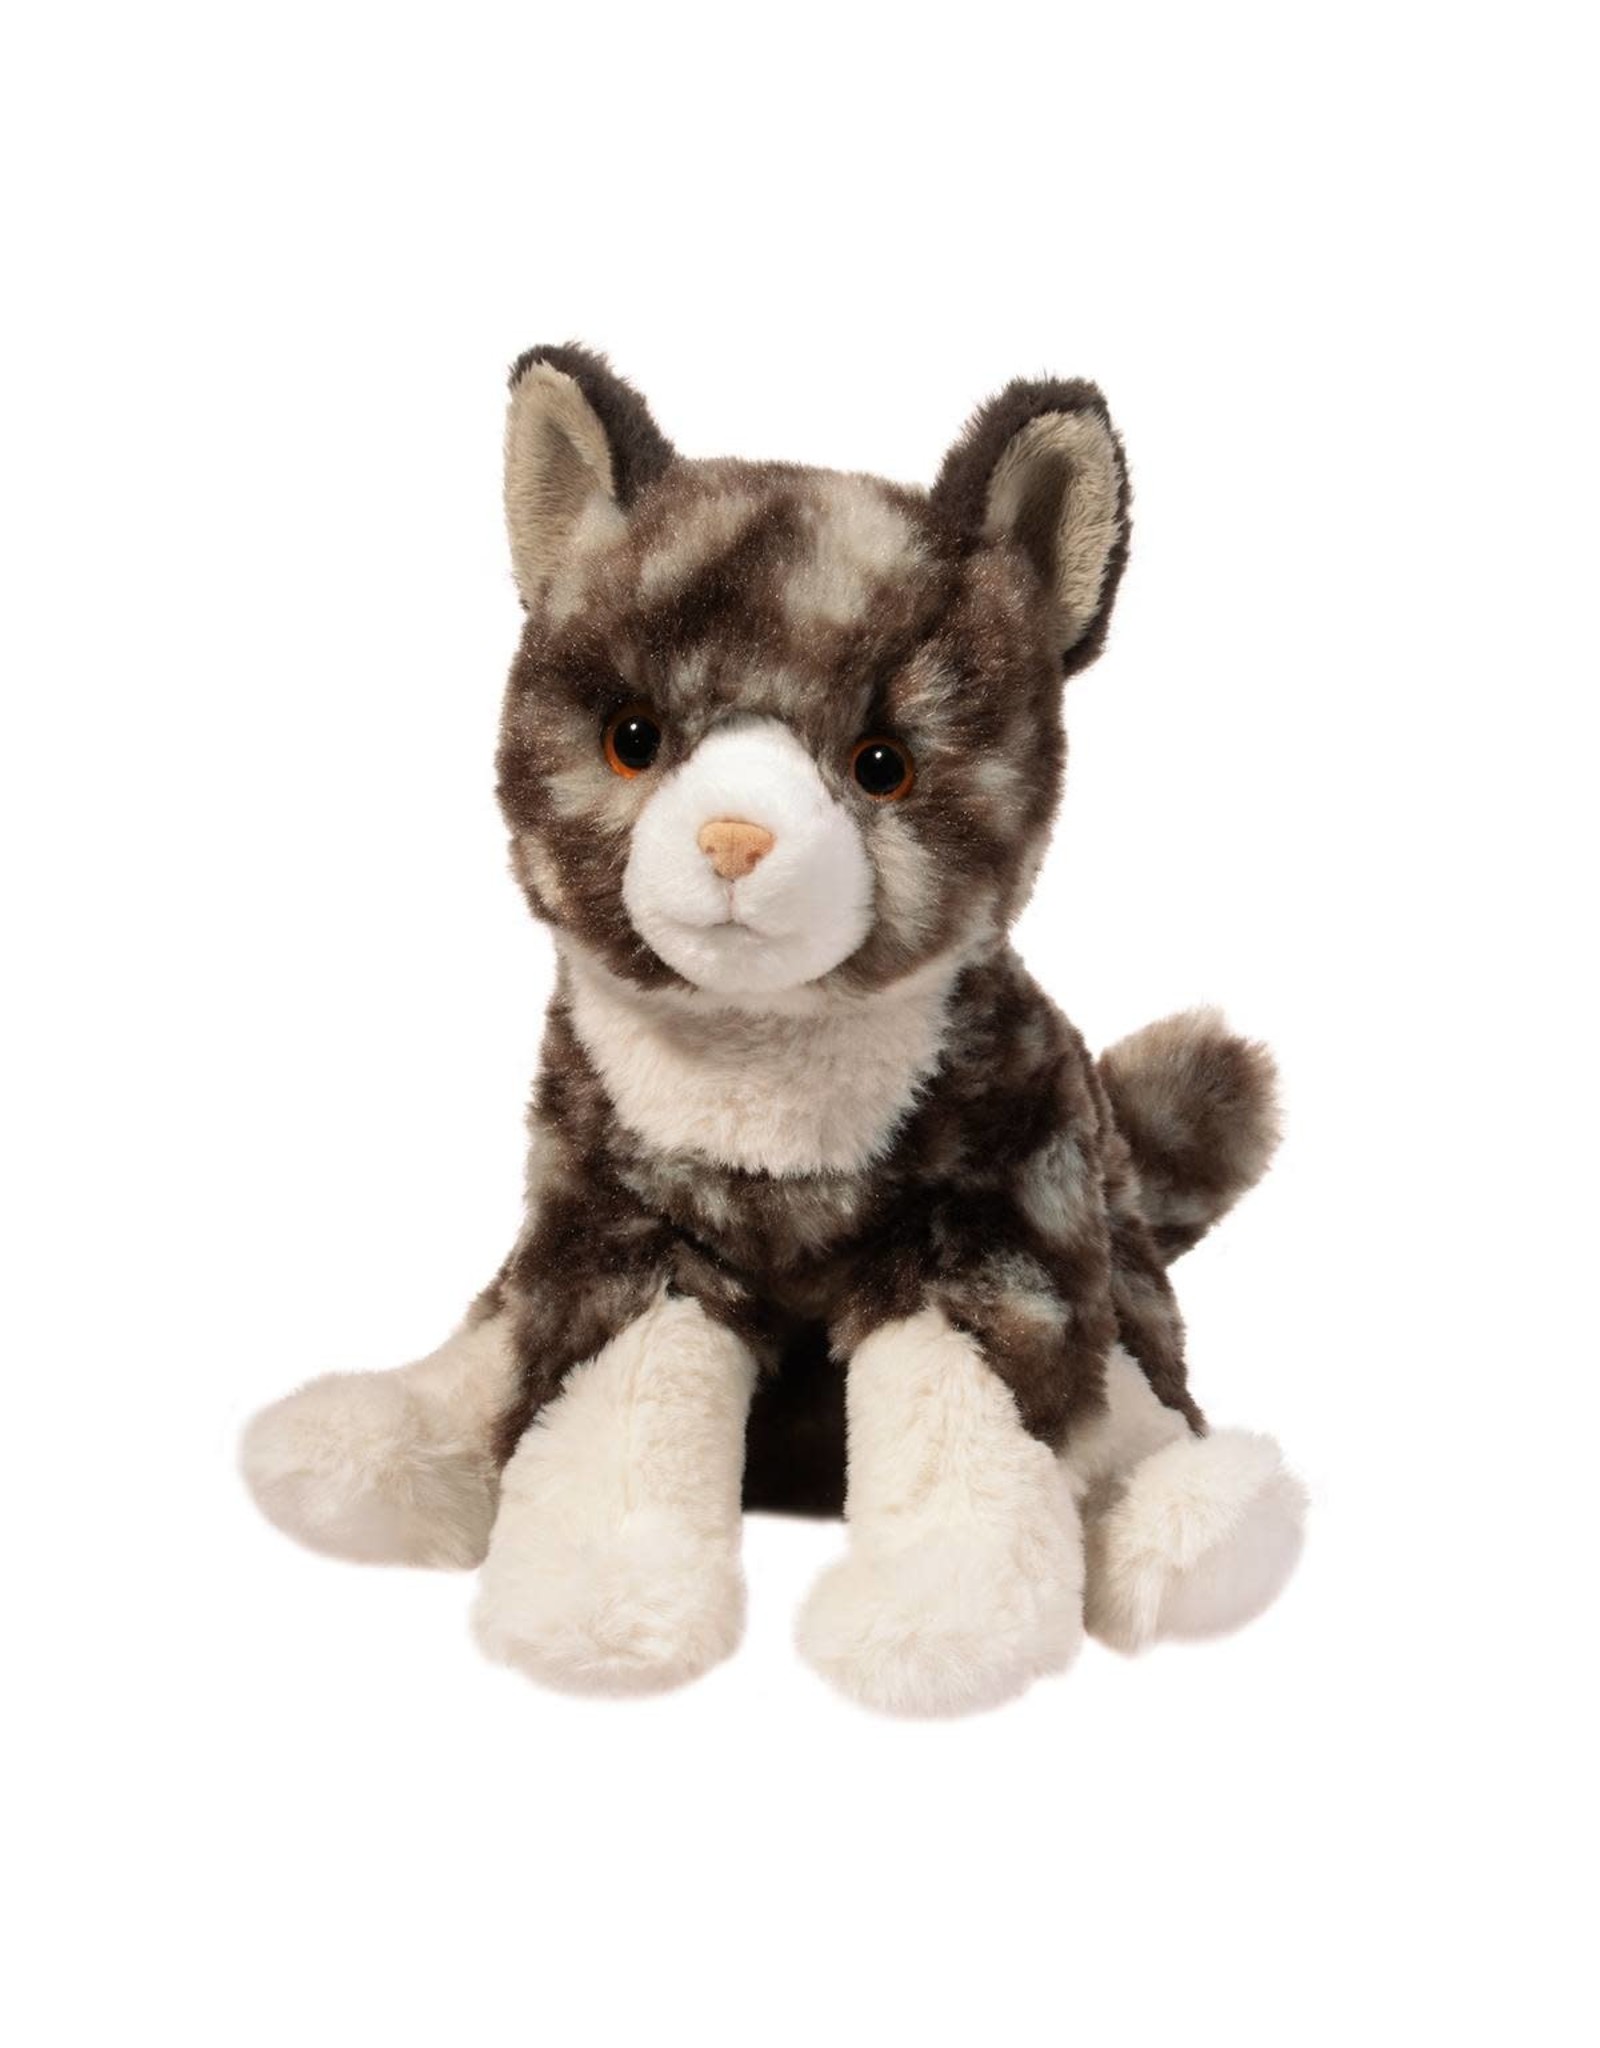 Trixie the Cat 9"